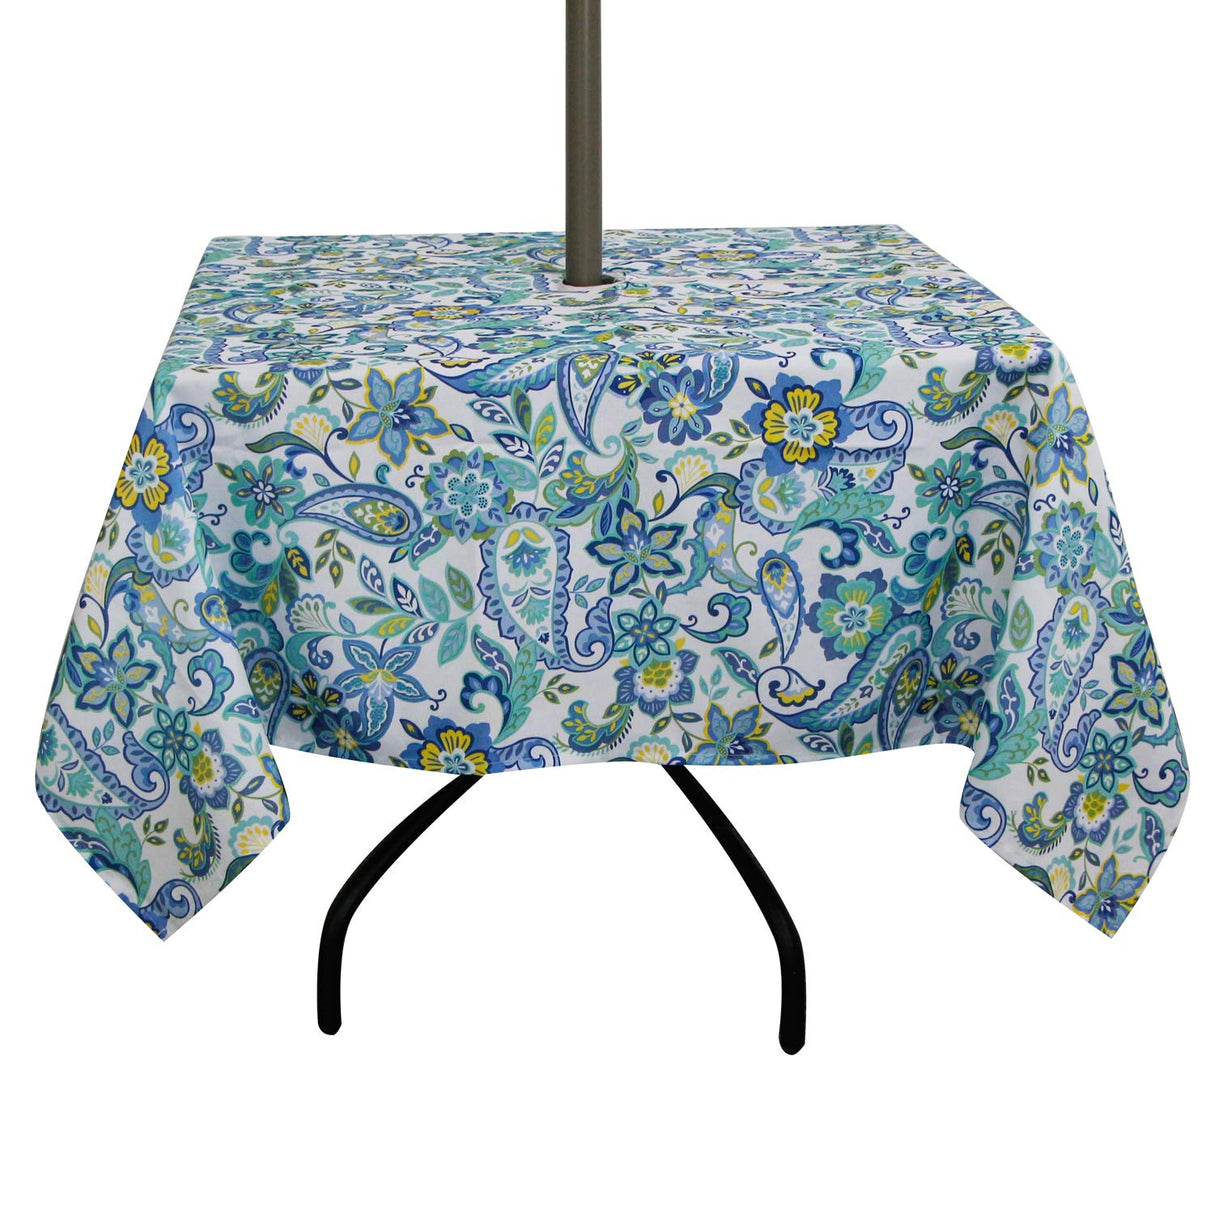 ColorBird Modern Paisley Flower Tablecloth Water Resistant Table Cover with Zipper Umbrella Hole for Patio Garden Tabletop Decor (Square, 60" x 60", Zippered, Paisley)